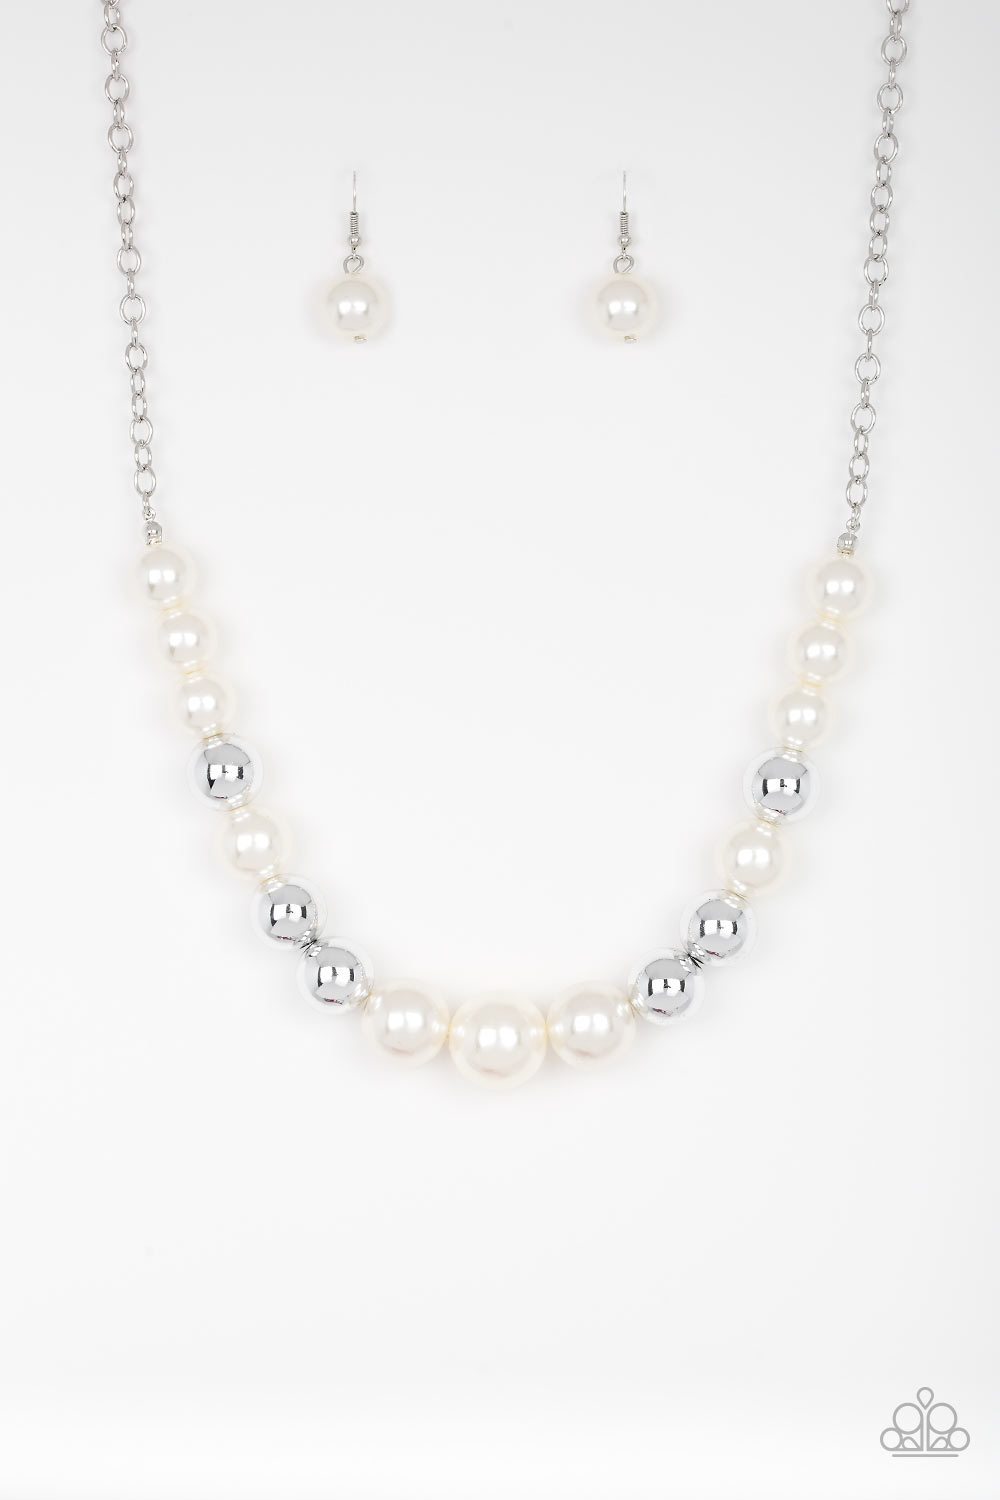 Necklace - Take Note - White